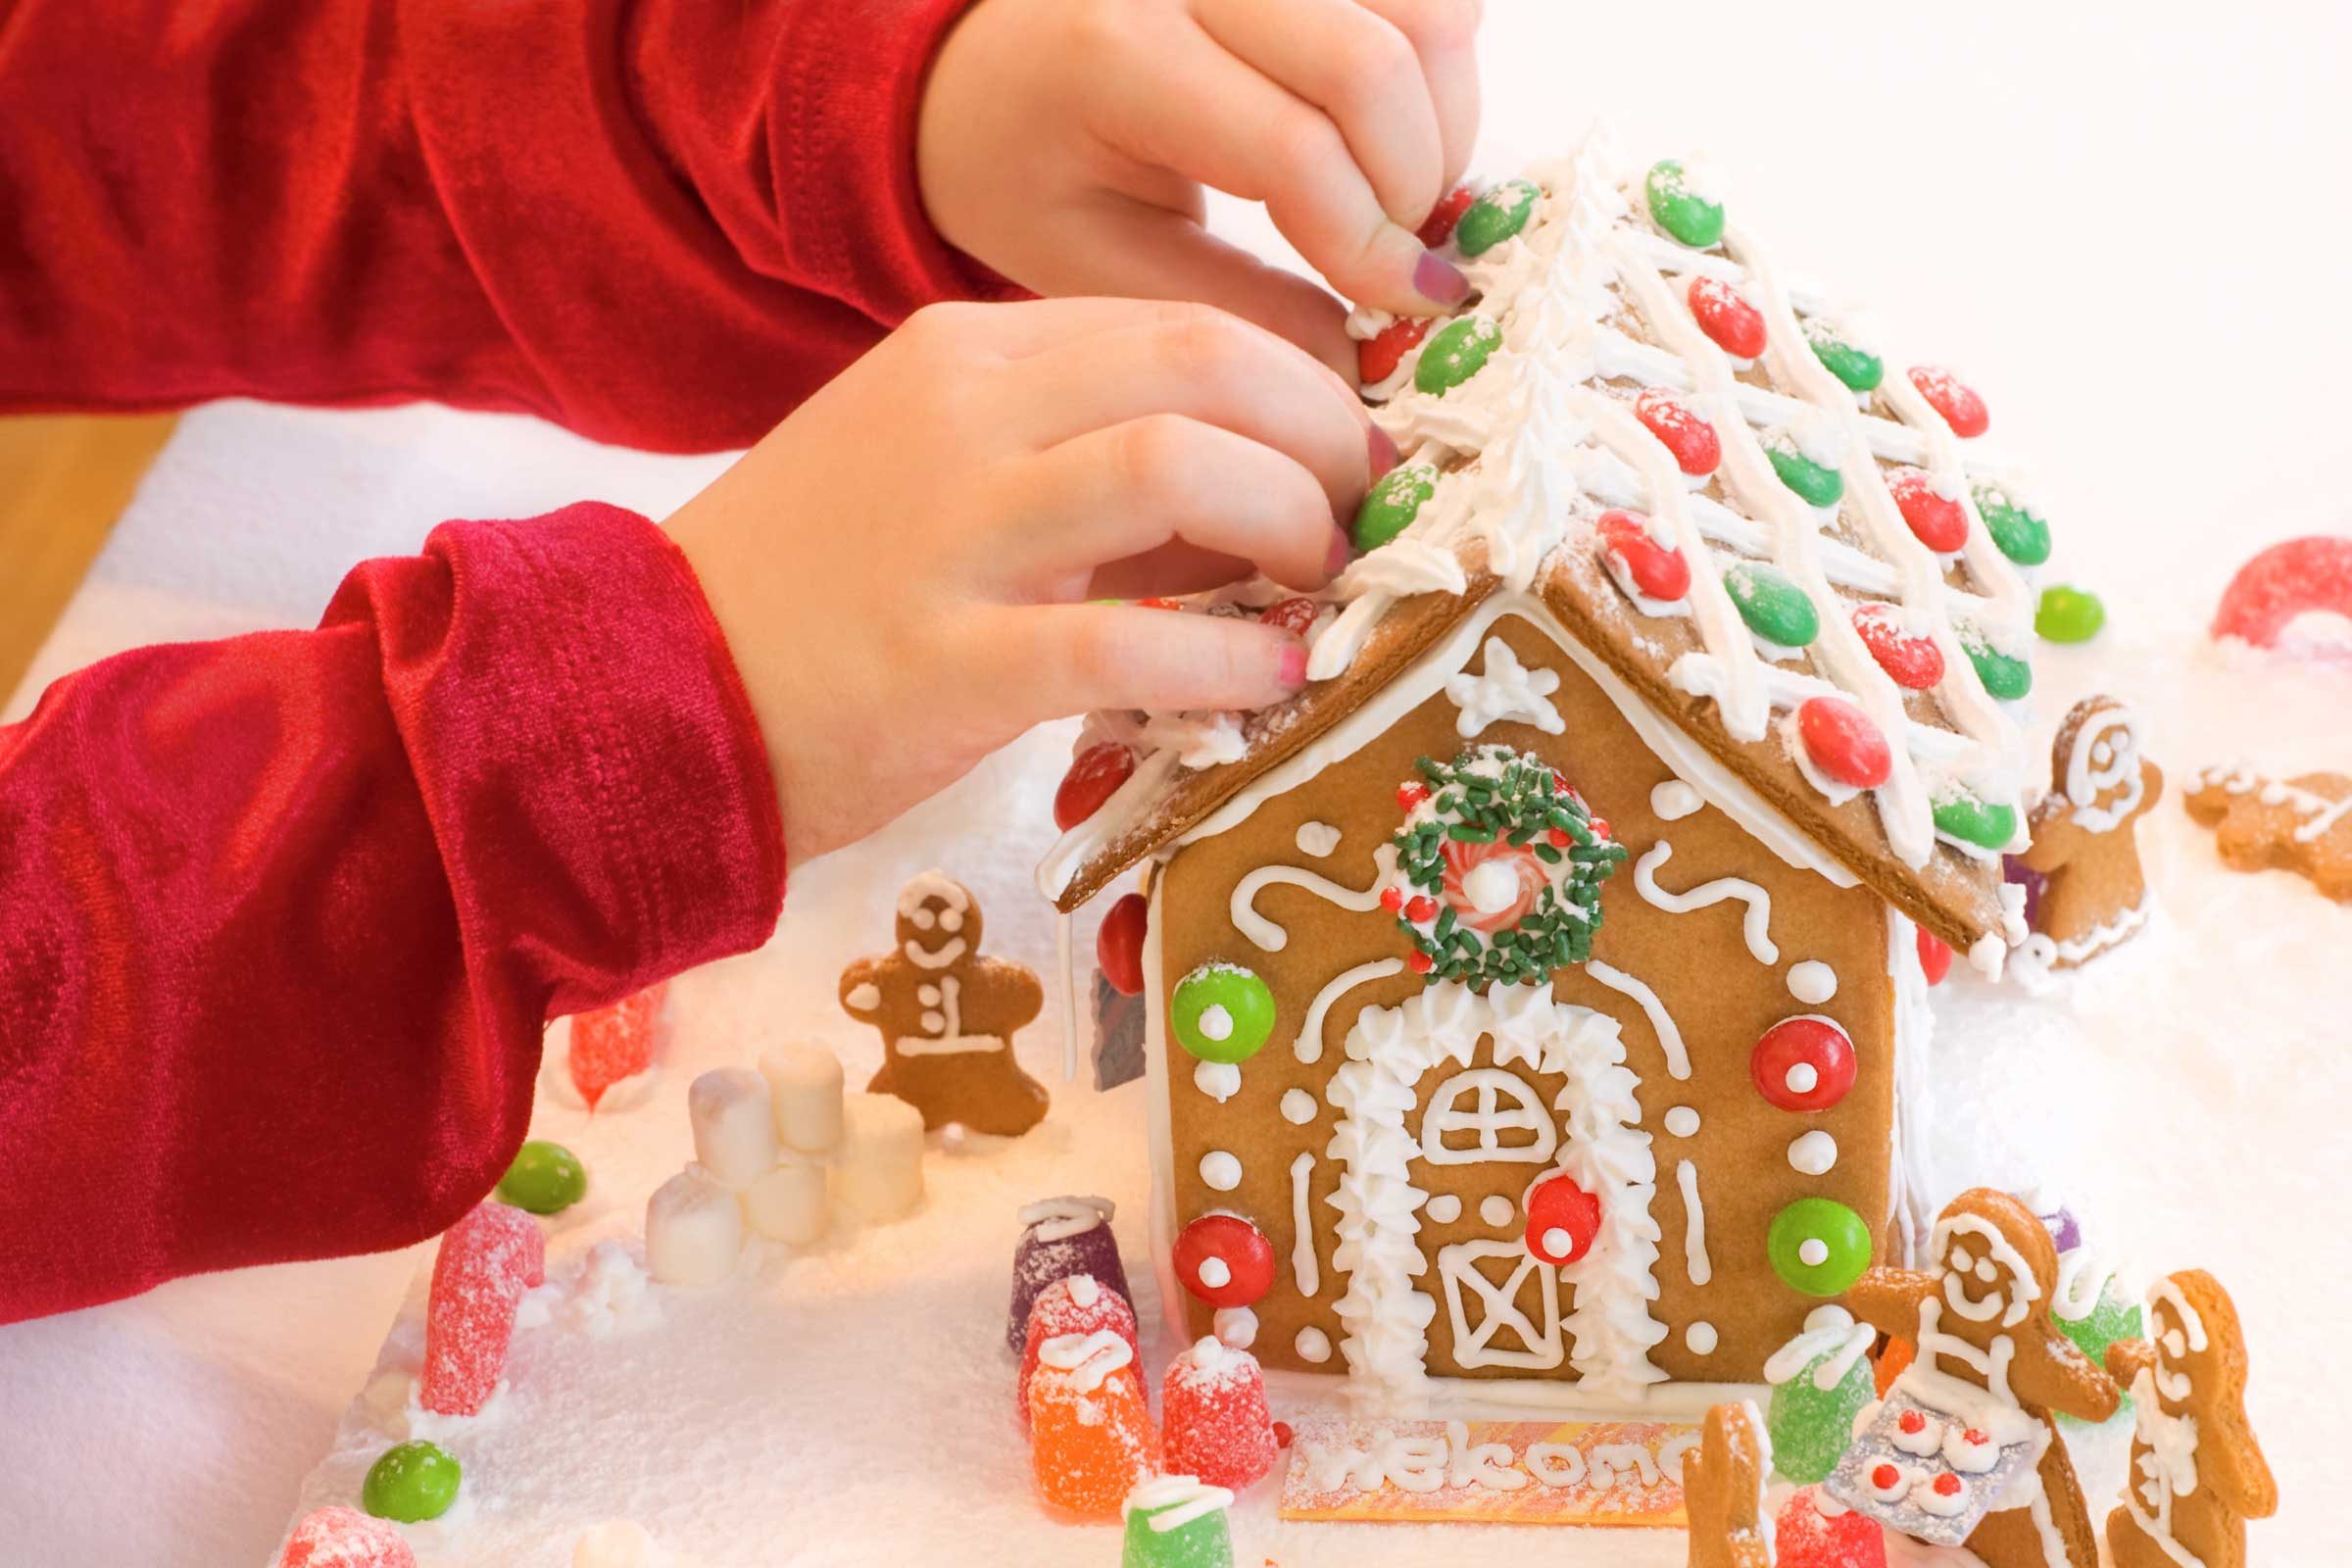 Gingerbread House Ideas and Decorating Tips | Reader's Digest